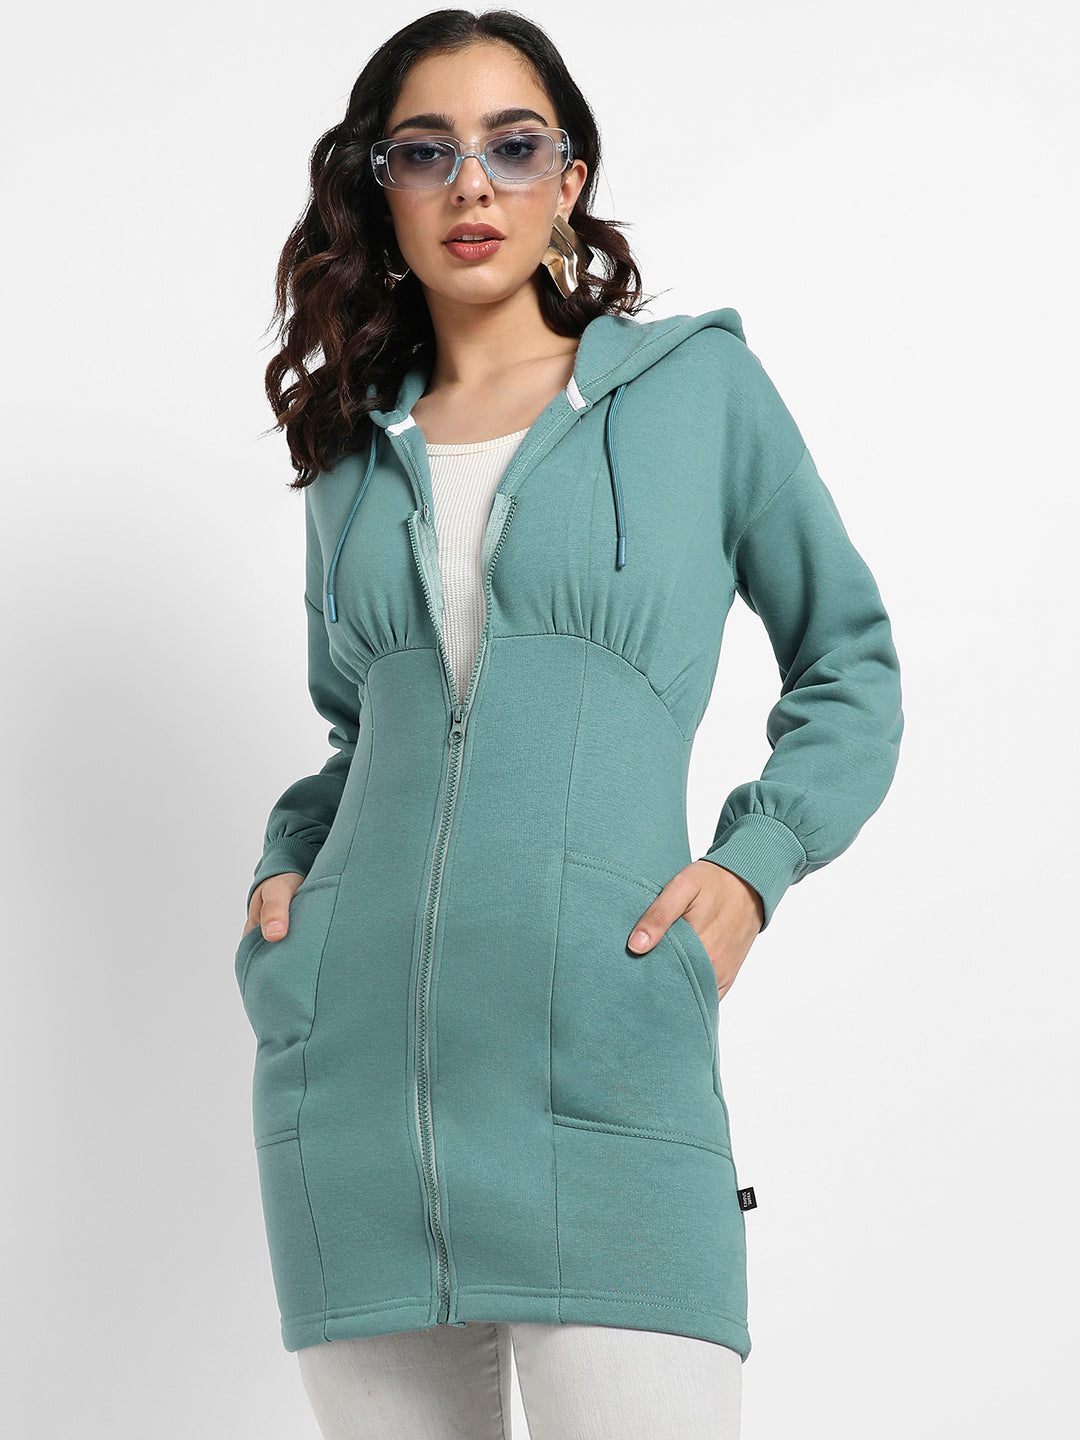 Hooded Bodycon Dress With Insert Pockets